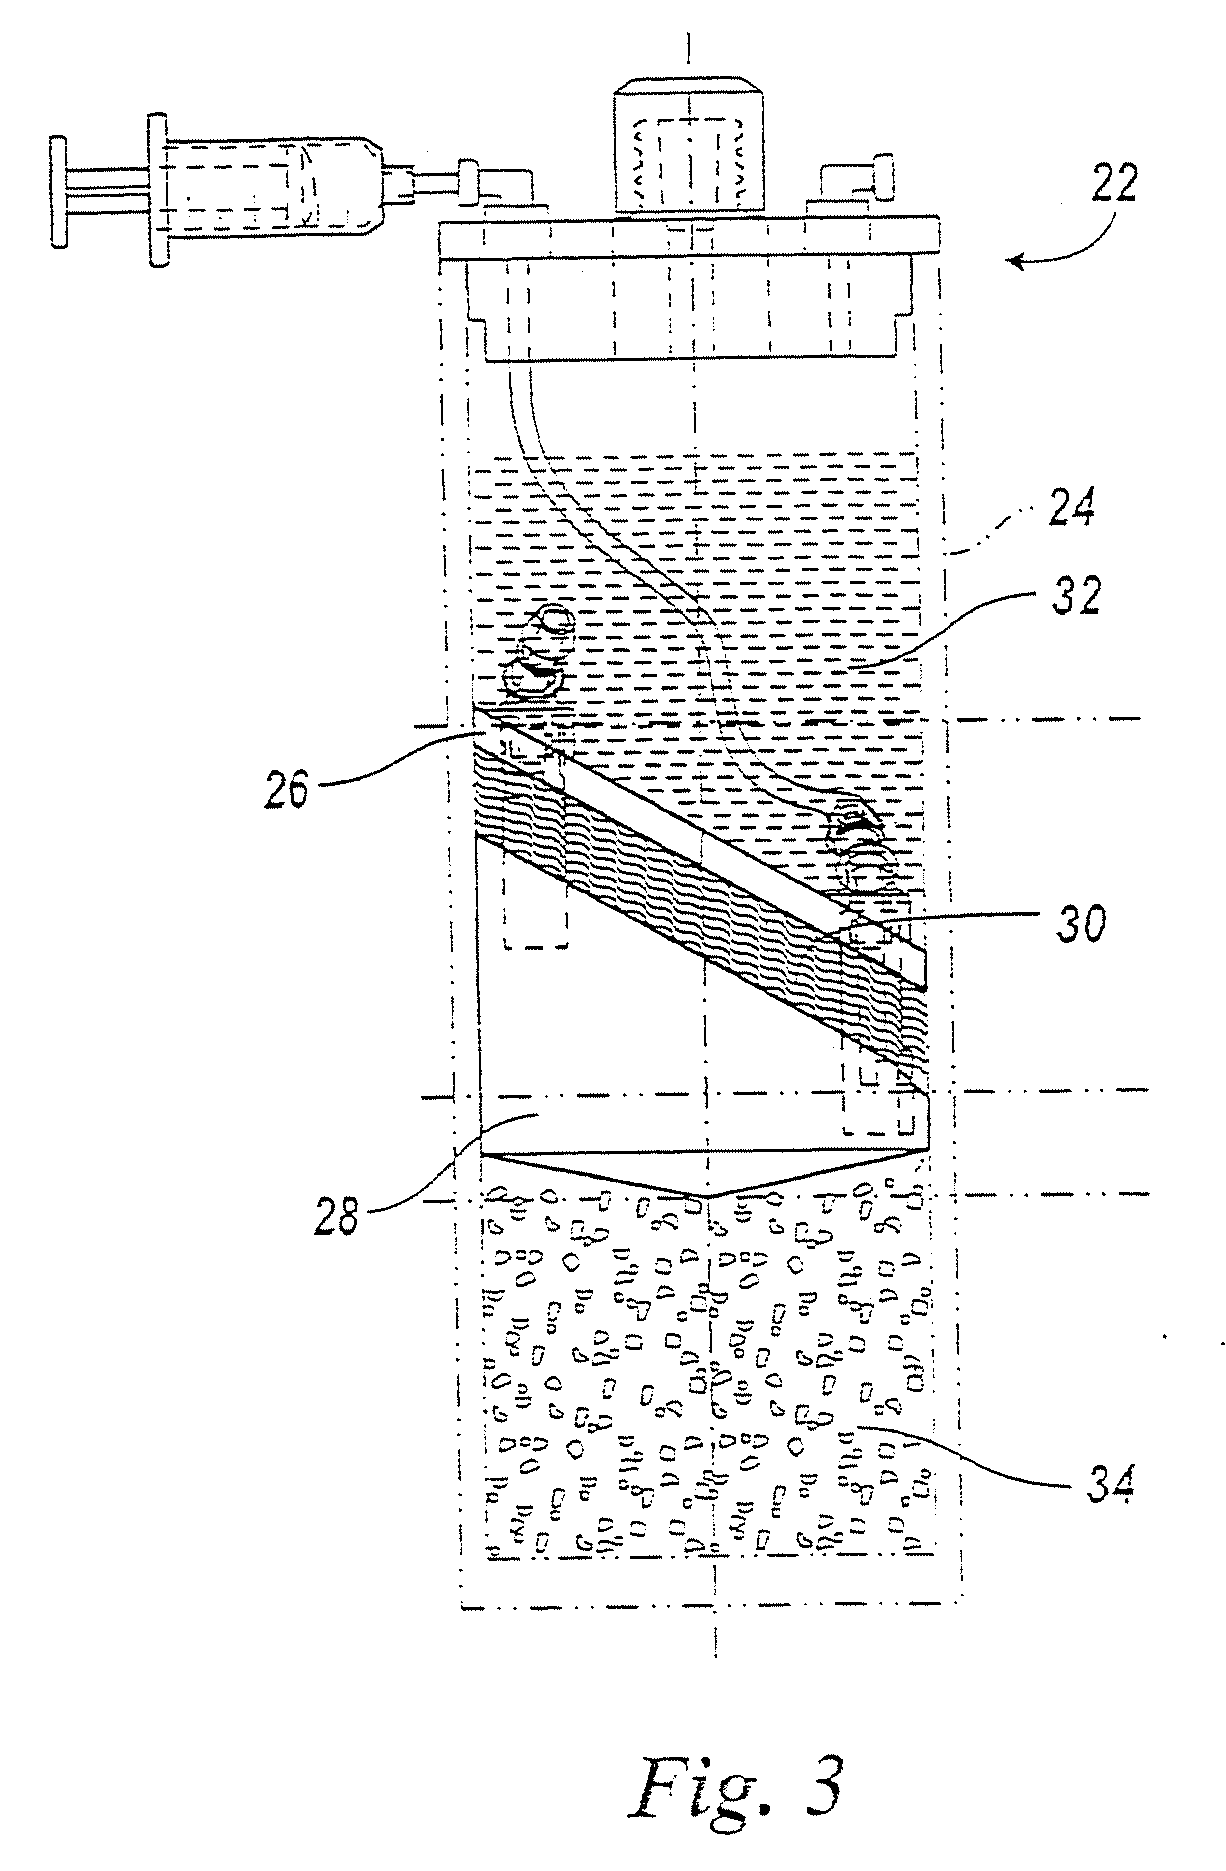 Method and device for repair of cartilage defects